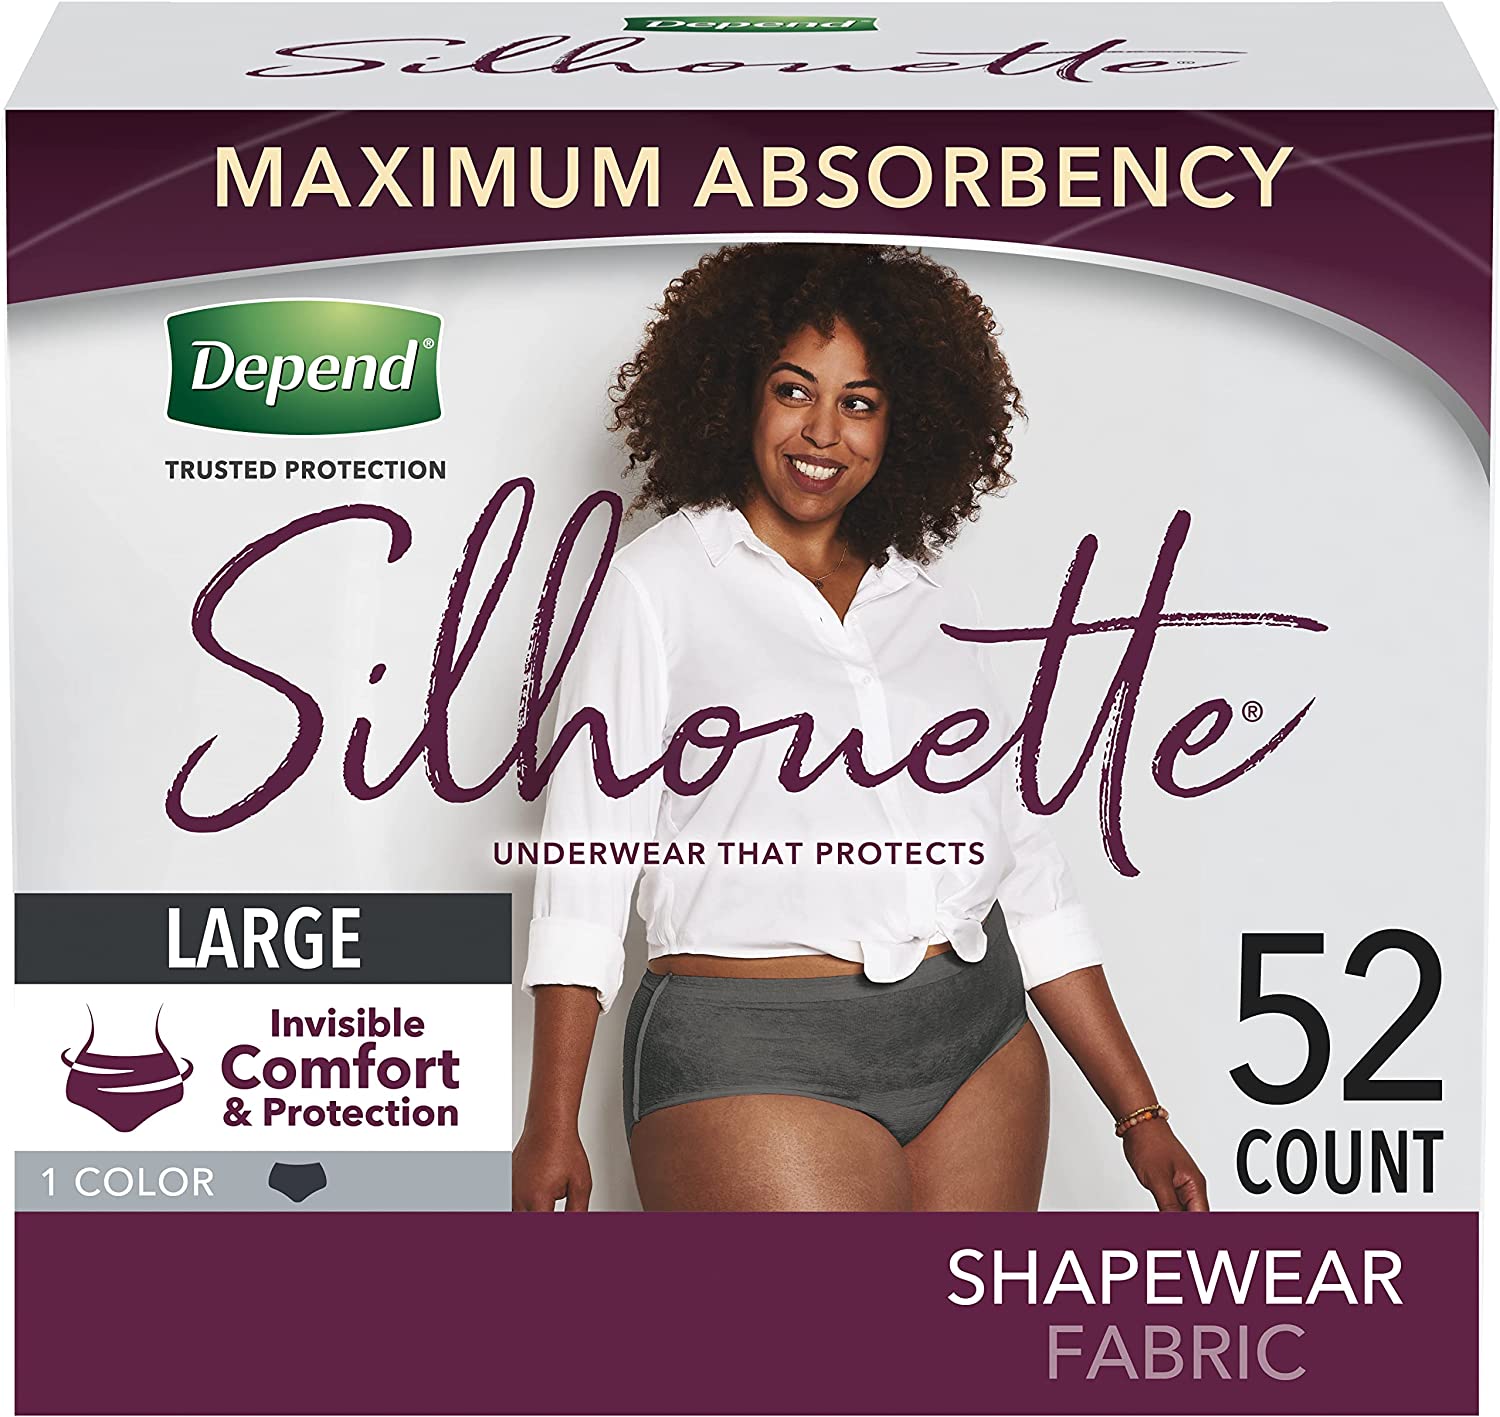 Depend Silhouette Adult Incontinence and Postpartum Underwear for Women, Large (40–52" Waist), Maximum Absorbency, Black, 52 Count (2 Packs of 26)